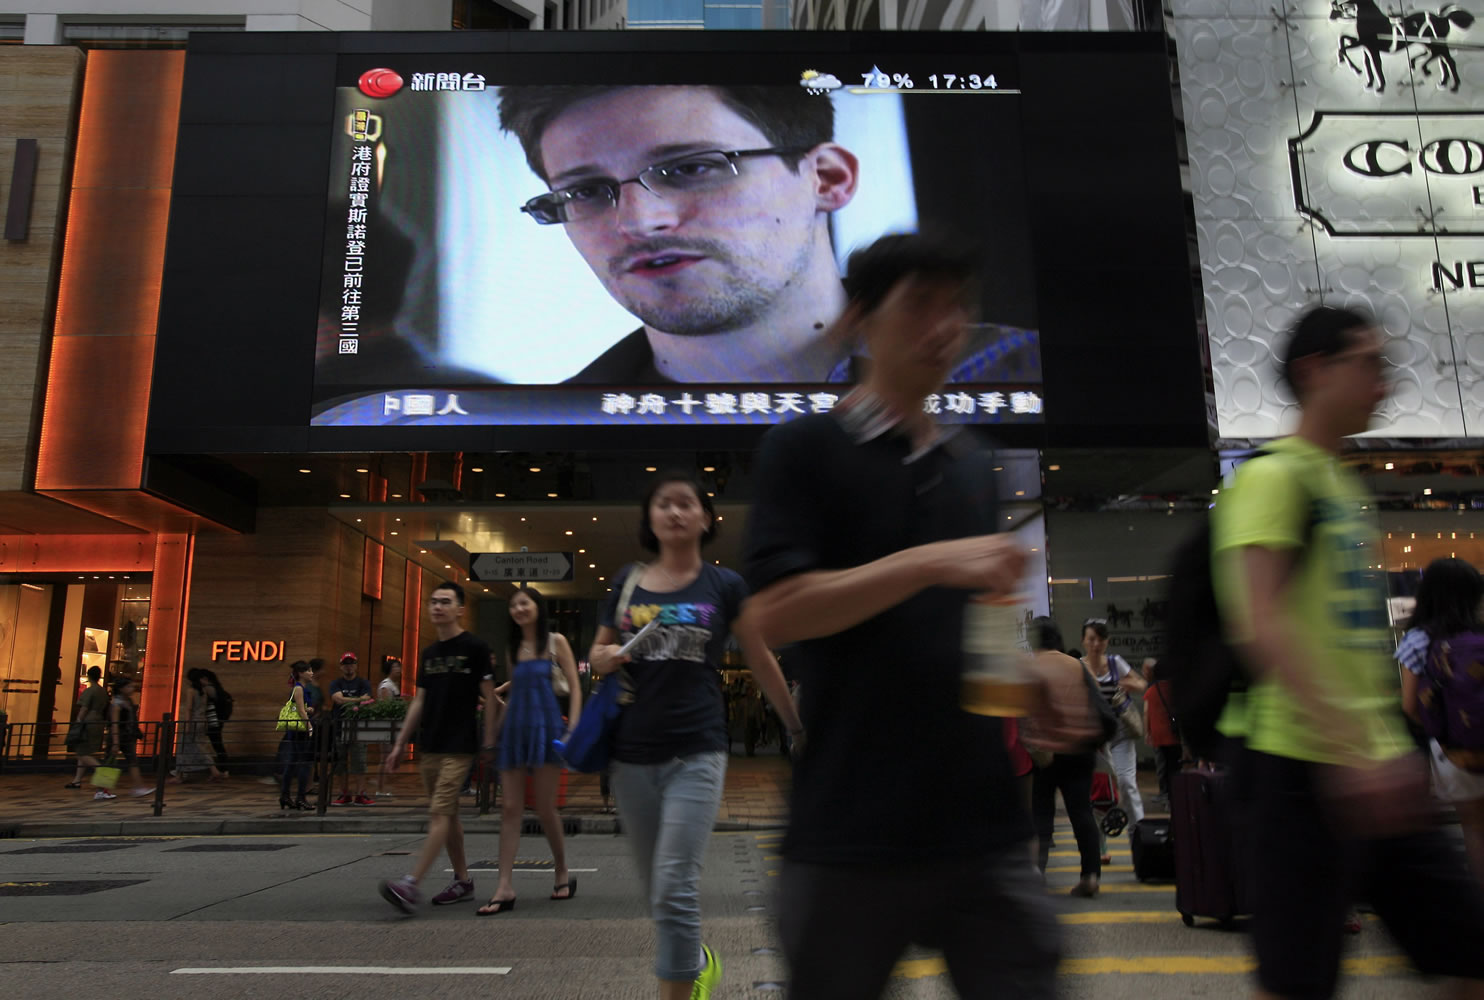 A TV screen shows a news report of Edward Snowden, a former CIA employee who leaked top-secret documents about sweeping U.S. surveillance programs, at a shopping mall in Hong Kong on June 23. The saga of Edward Snowden and the NSA makes one thing clear: The United States' central role in developing the Internet and hosting its most powerful players has made it the global leader in the surveillance game .